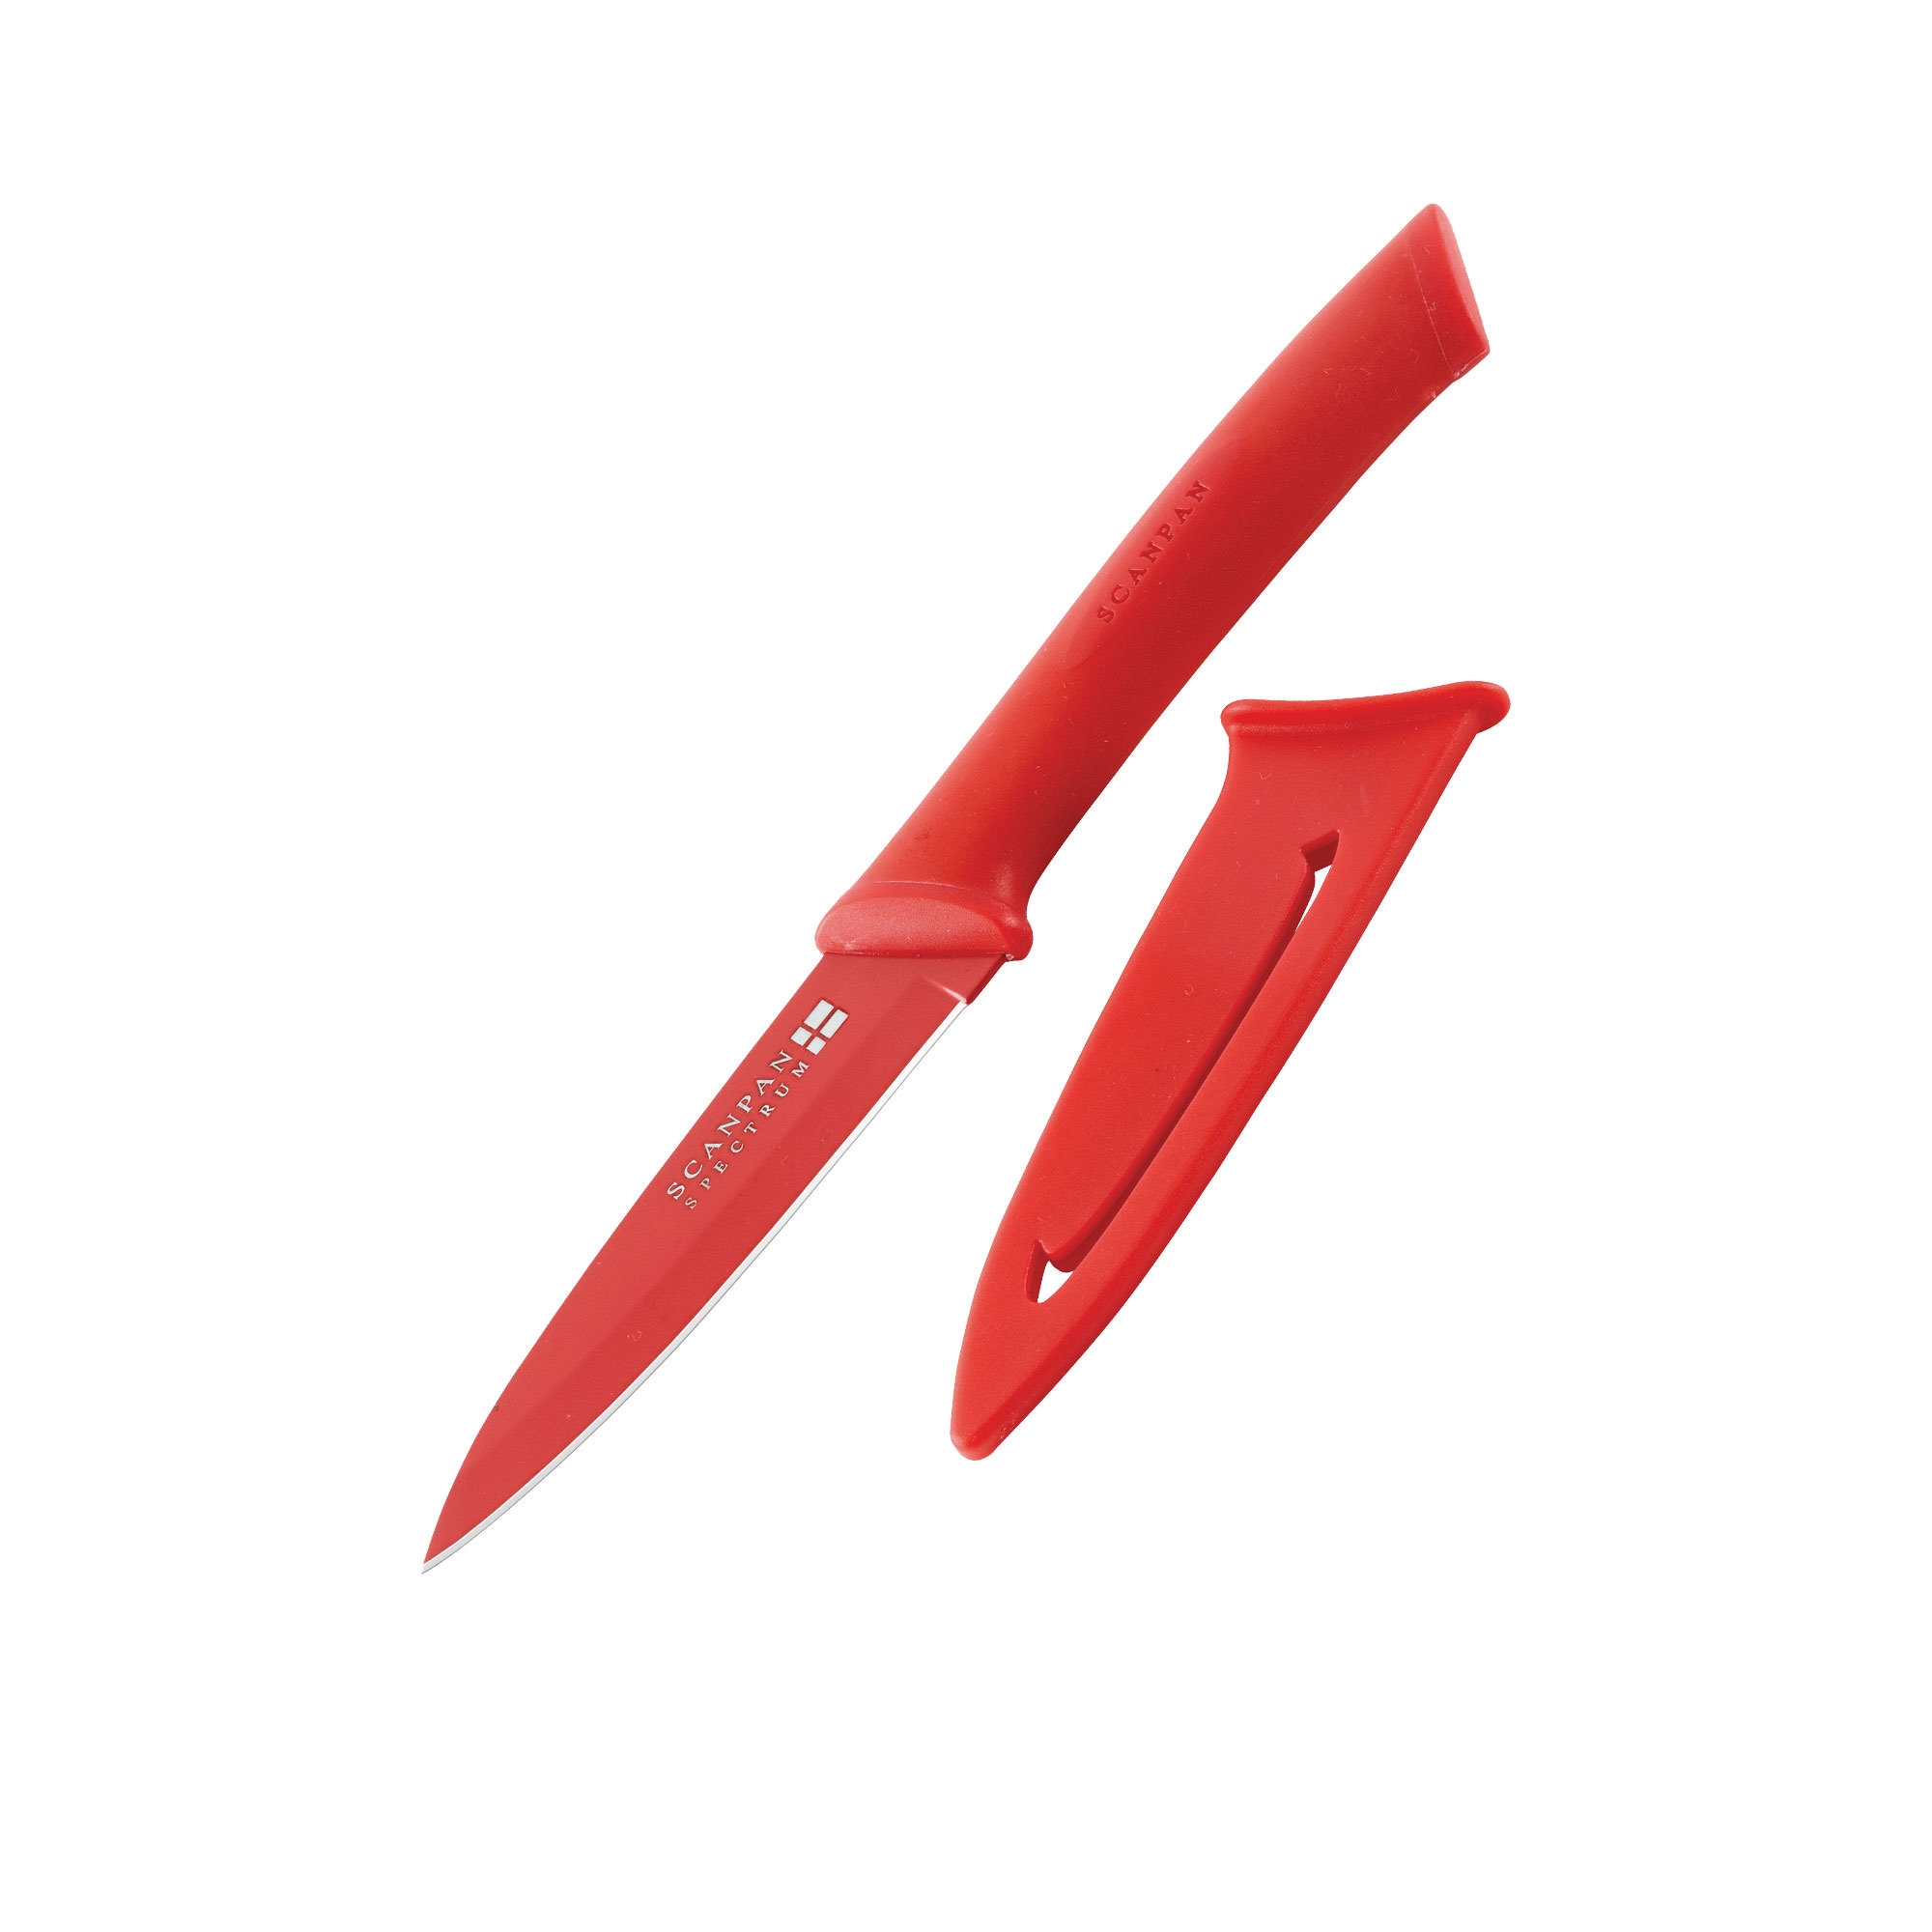 Scanpan Spectrum Soft Touch Utility Knife 9.5cm Red Image 1